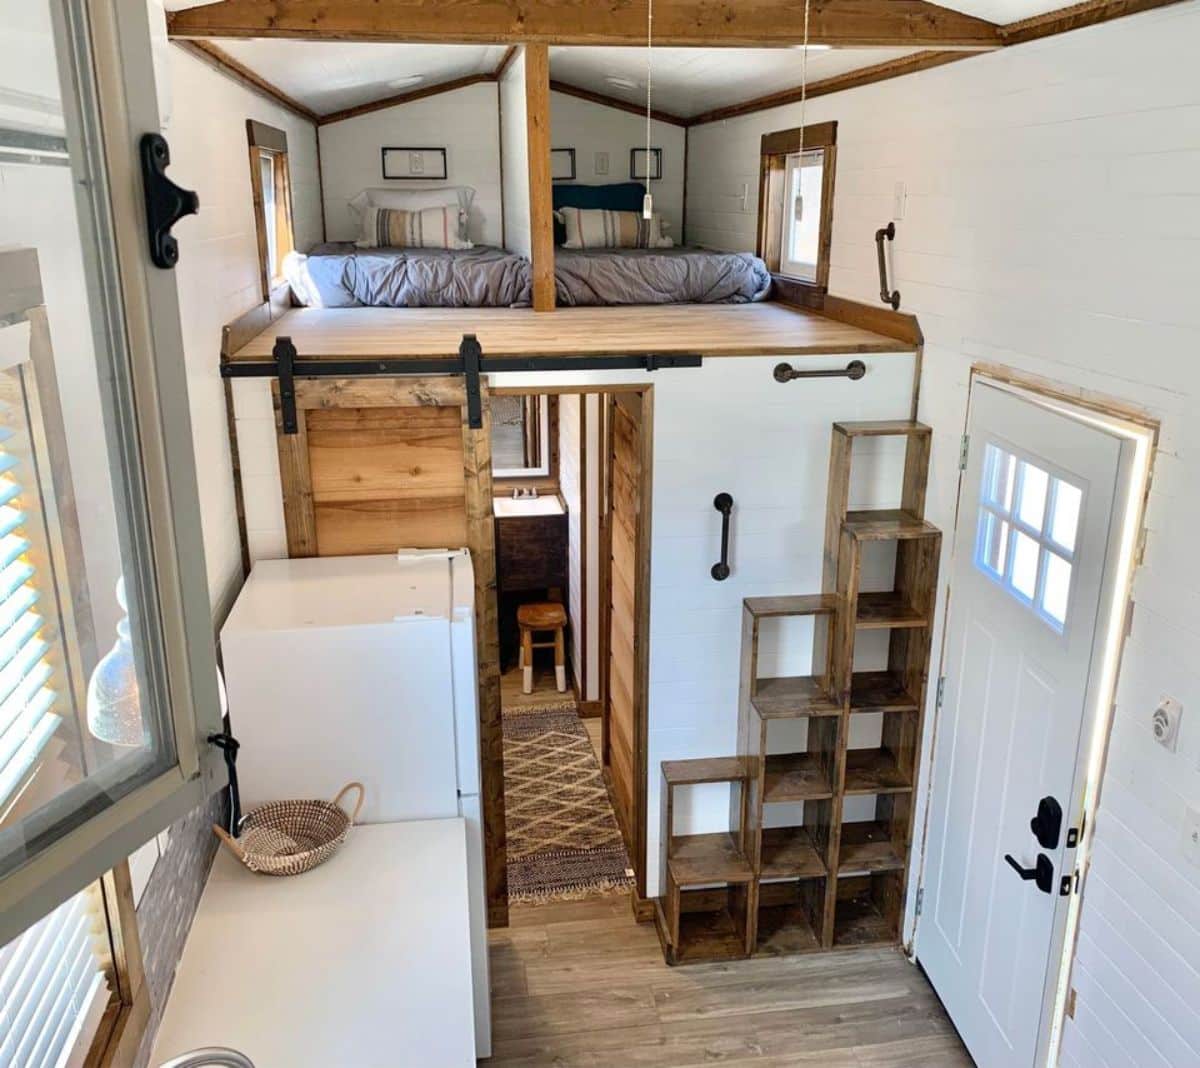 2 huge loft bedrooms 1 above the bathroom and 1 above the living area, both converted into 4 equal parts